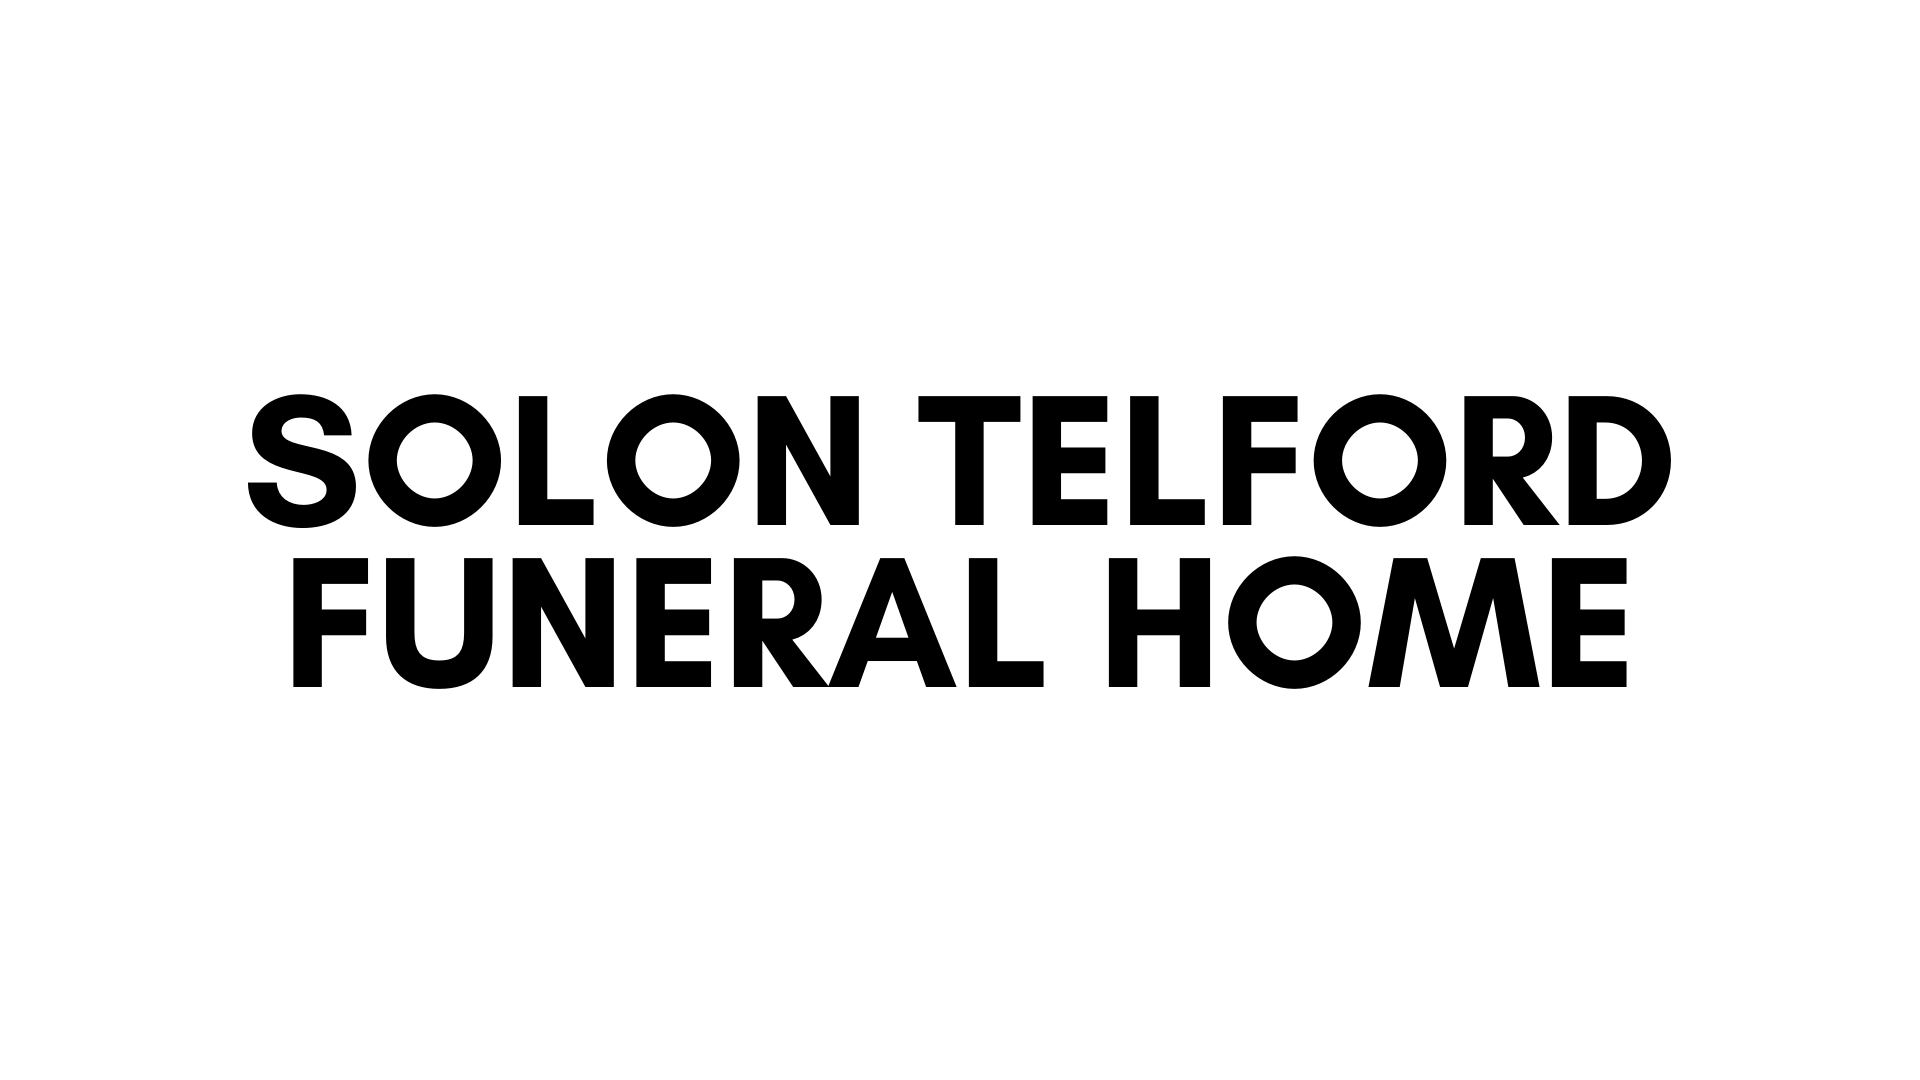 SOLON TELFORD FUNERAL HOME